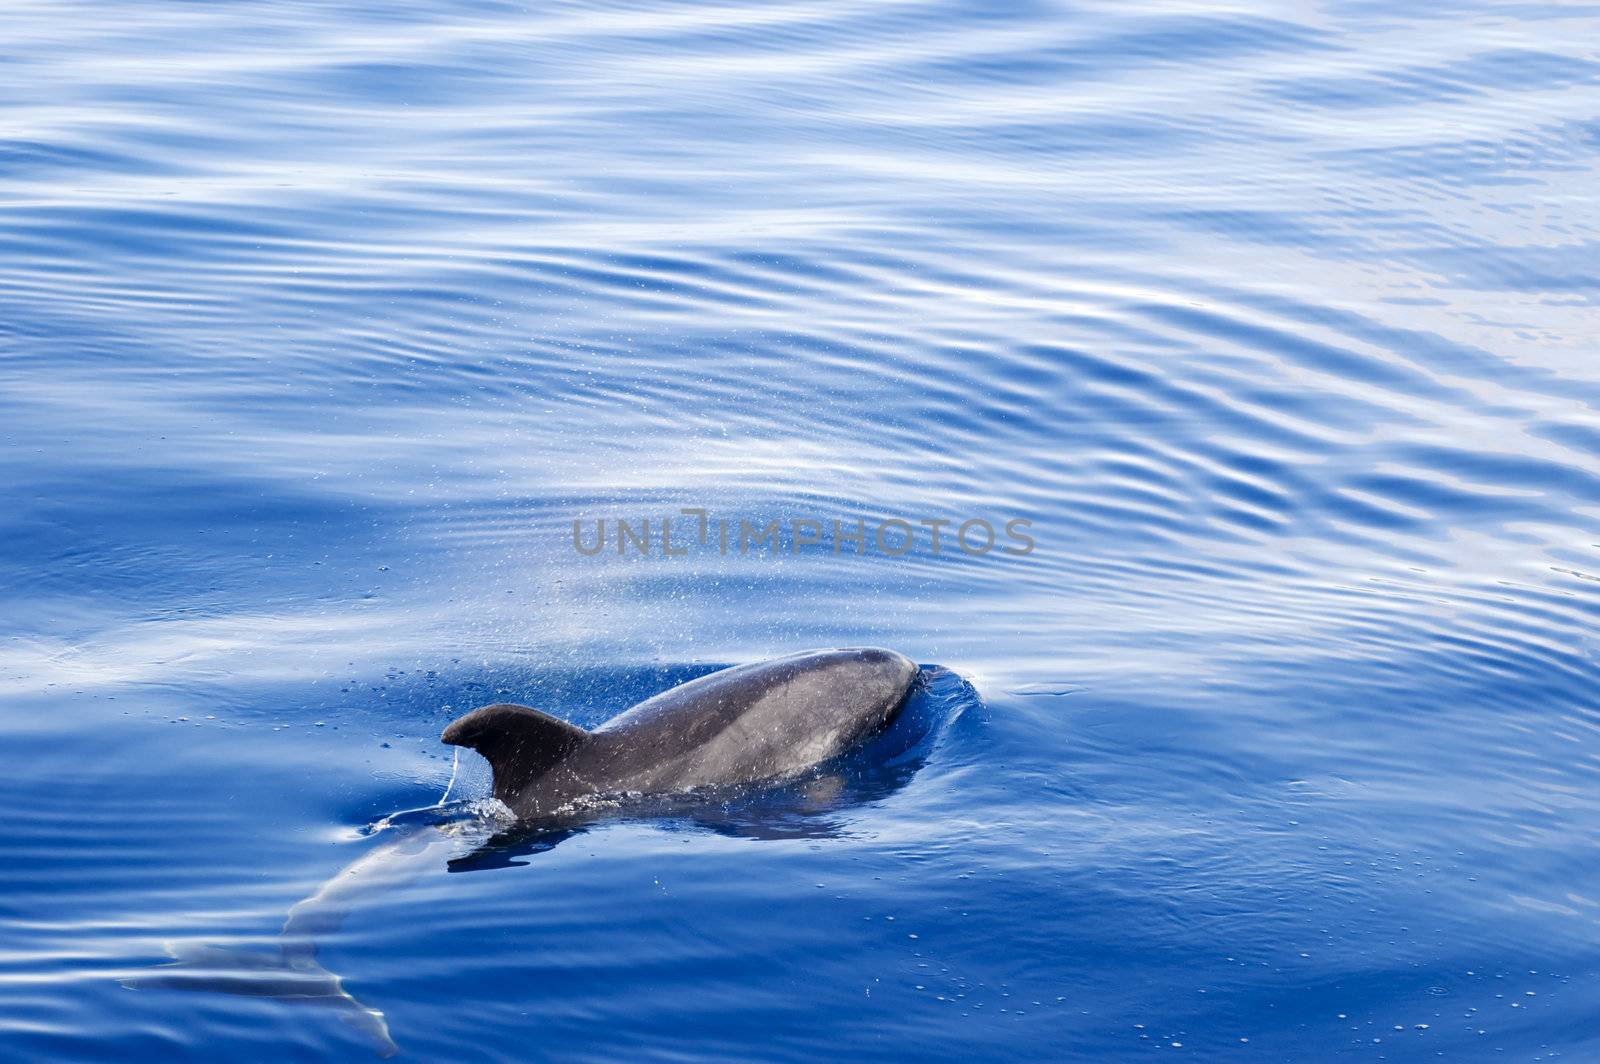 A view of a dolphin swimming nearby on the surface of calm, blue water.